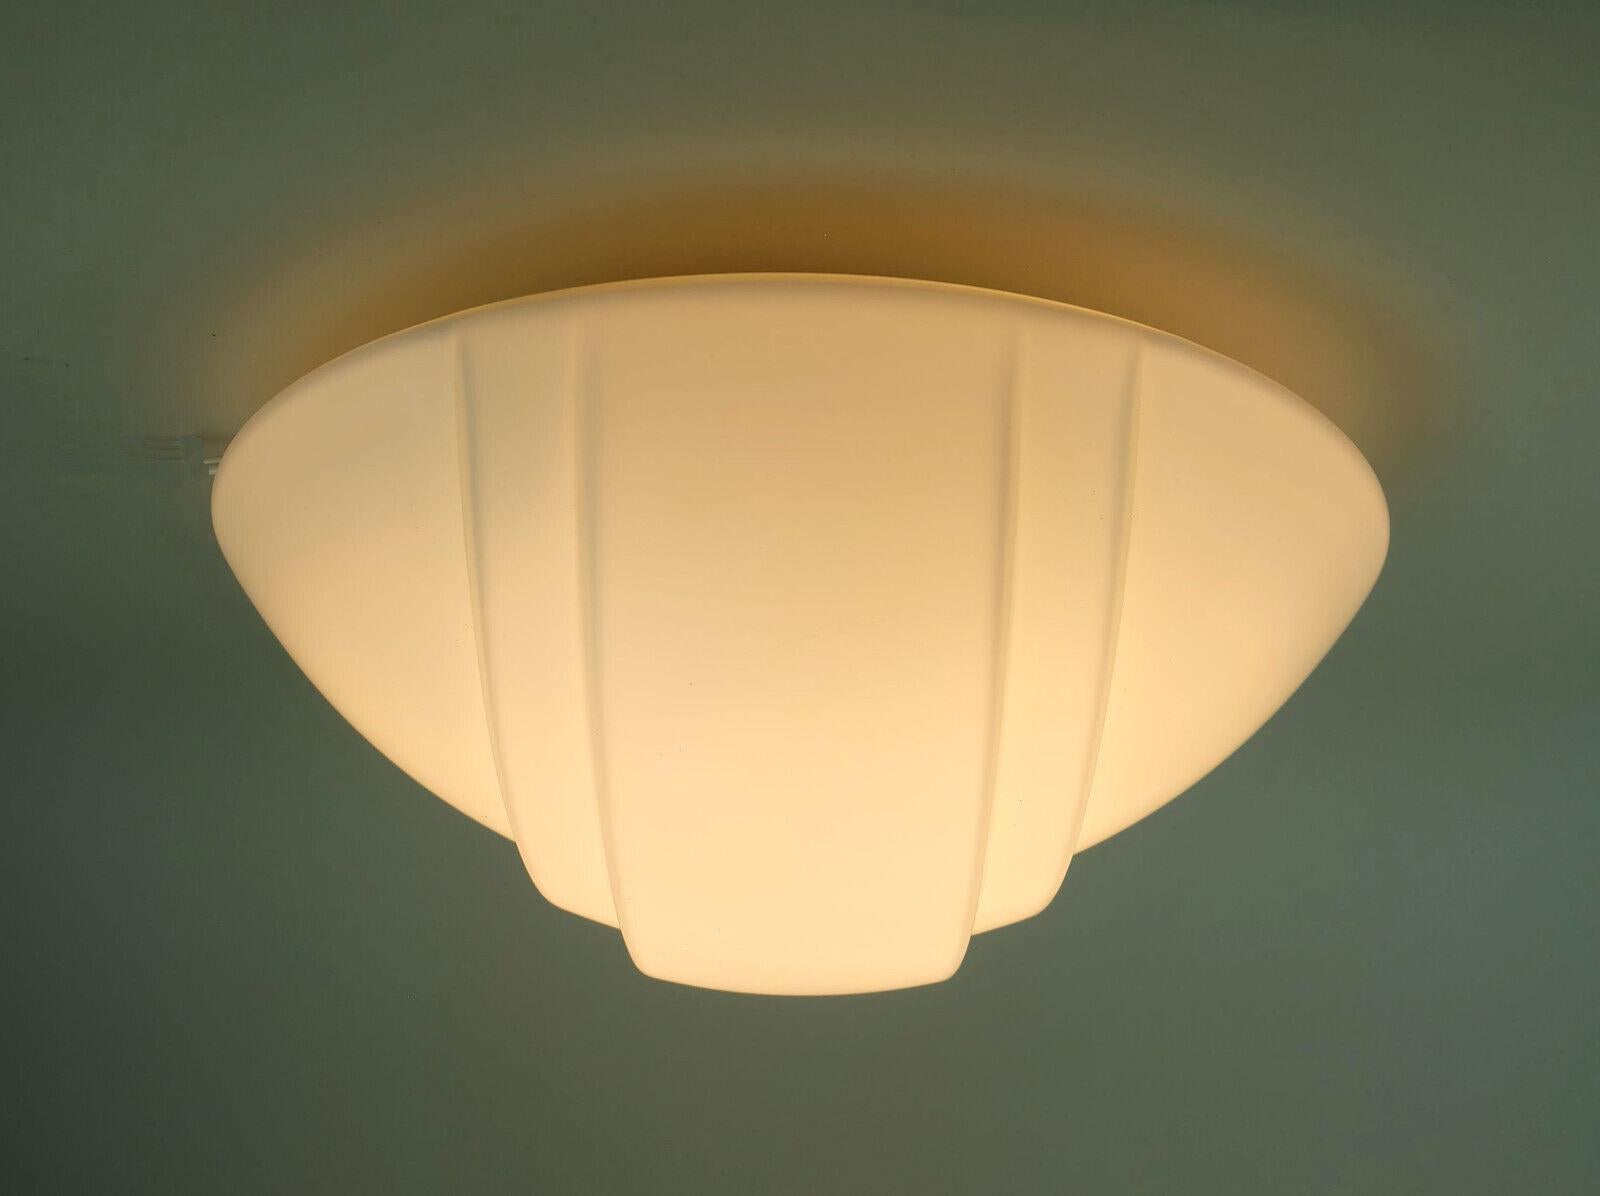 Ceiling fixture manufactured by Putzler in the 1970s to 1980s. Model 71292. Matt white opaline glass shade, base white lacquered metal. Holds 1 E27 light bulb each.

A pair of matching sconces is available.

Dimensions in cm: 
Diameter 32 cm, depth